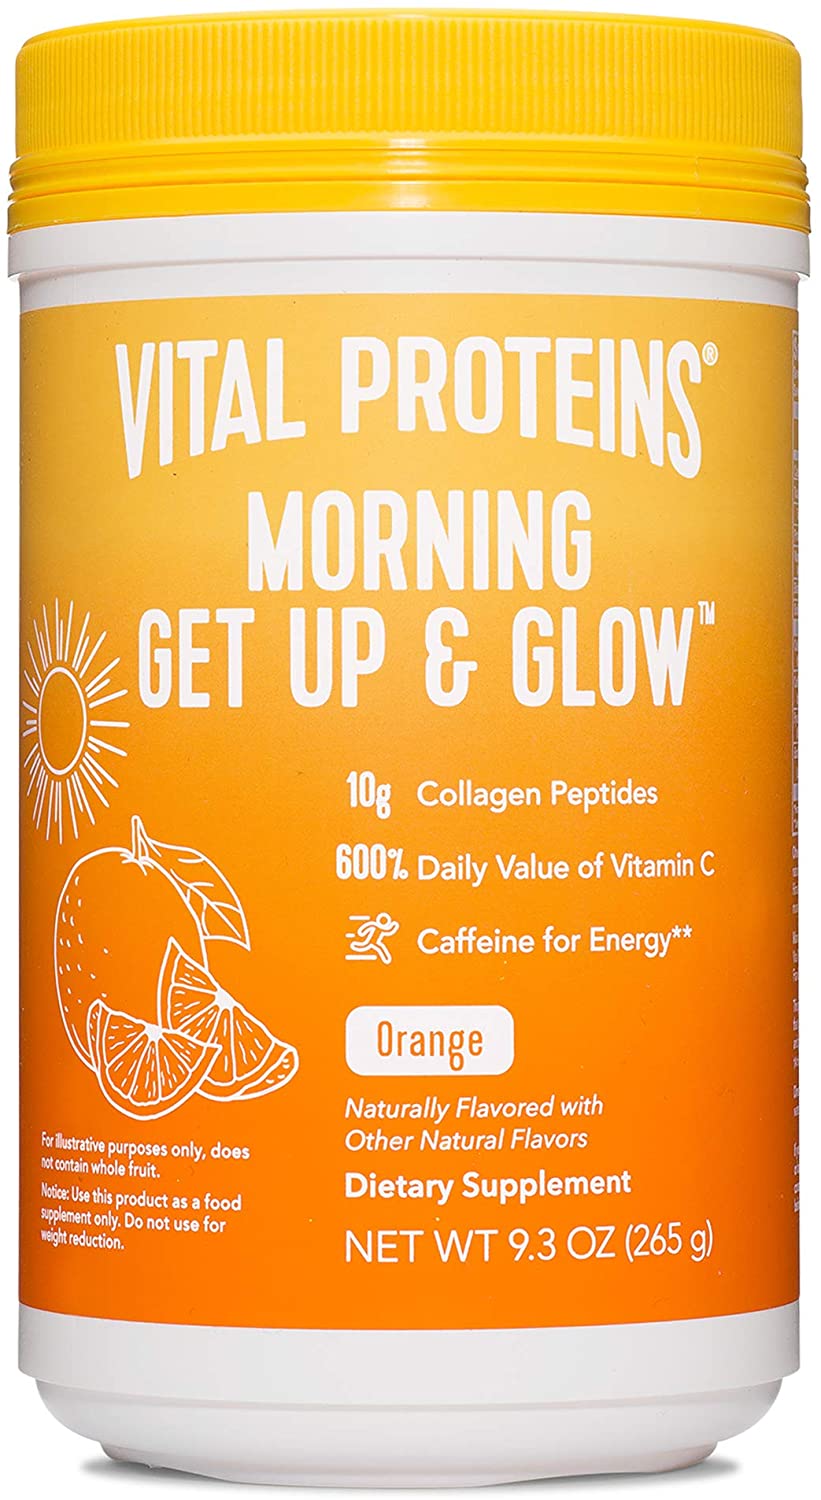 Vital Proteins Morning Get Up and Glow Collagen Powder - 9.3 oz